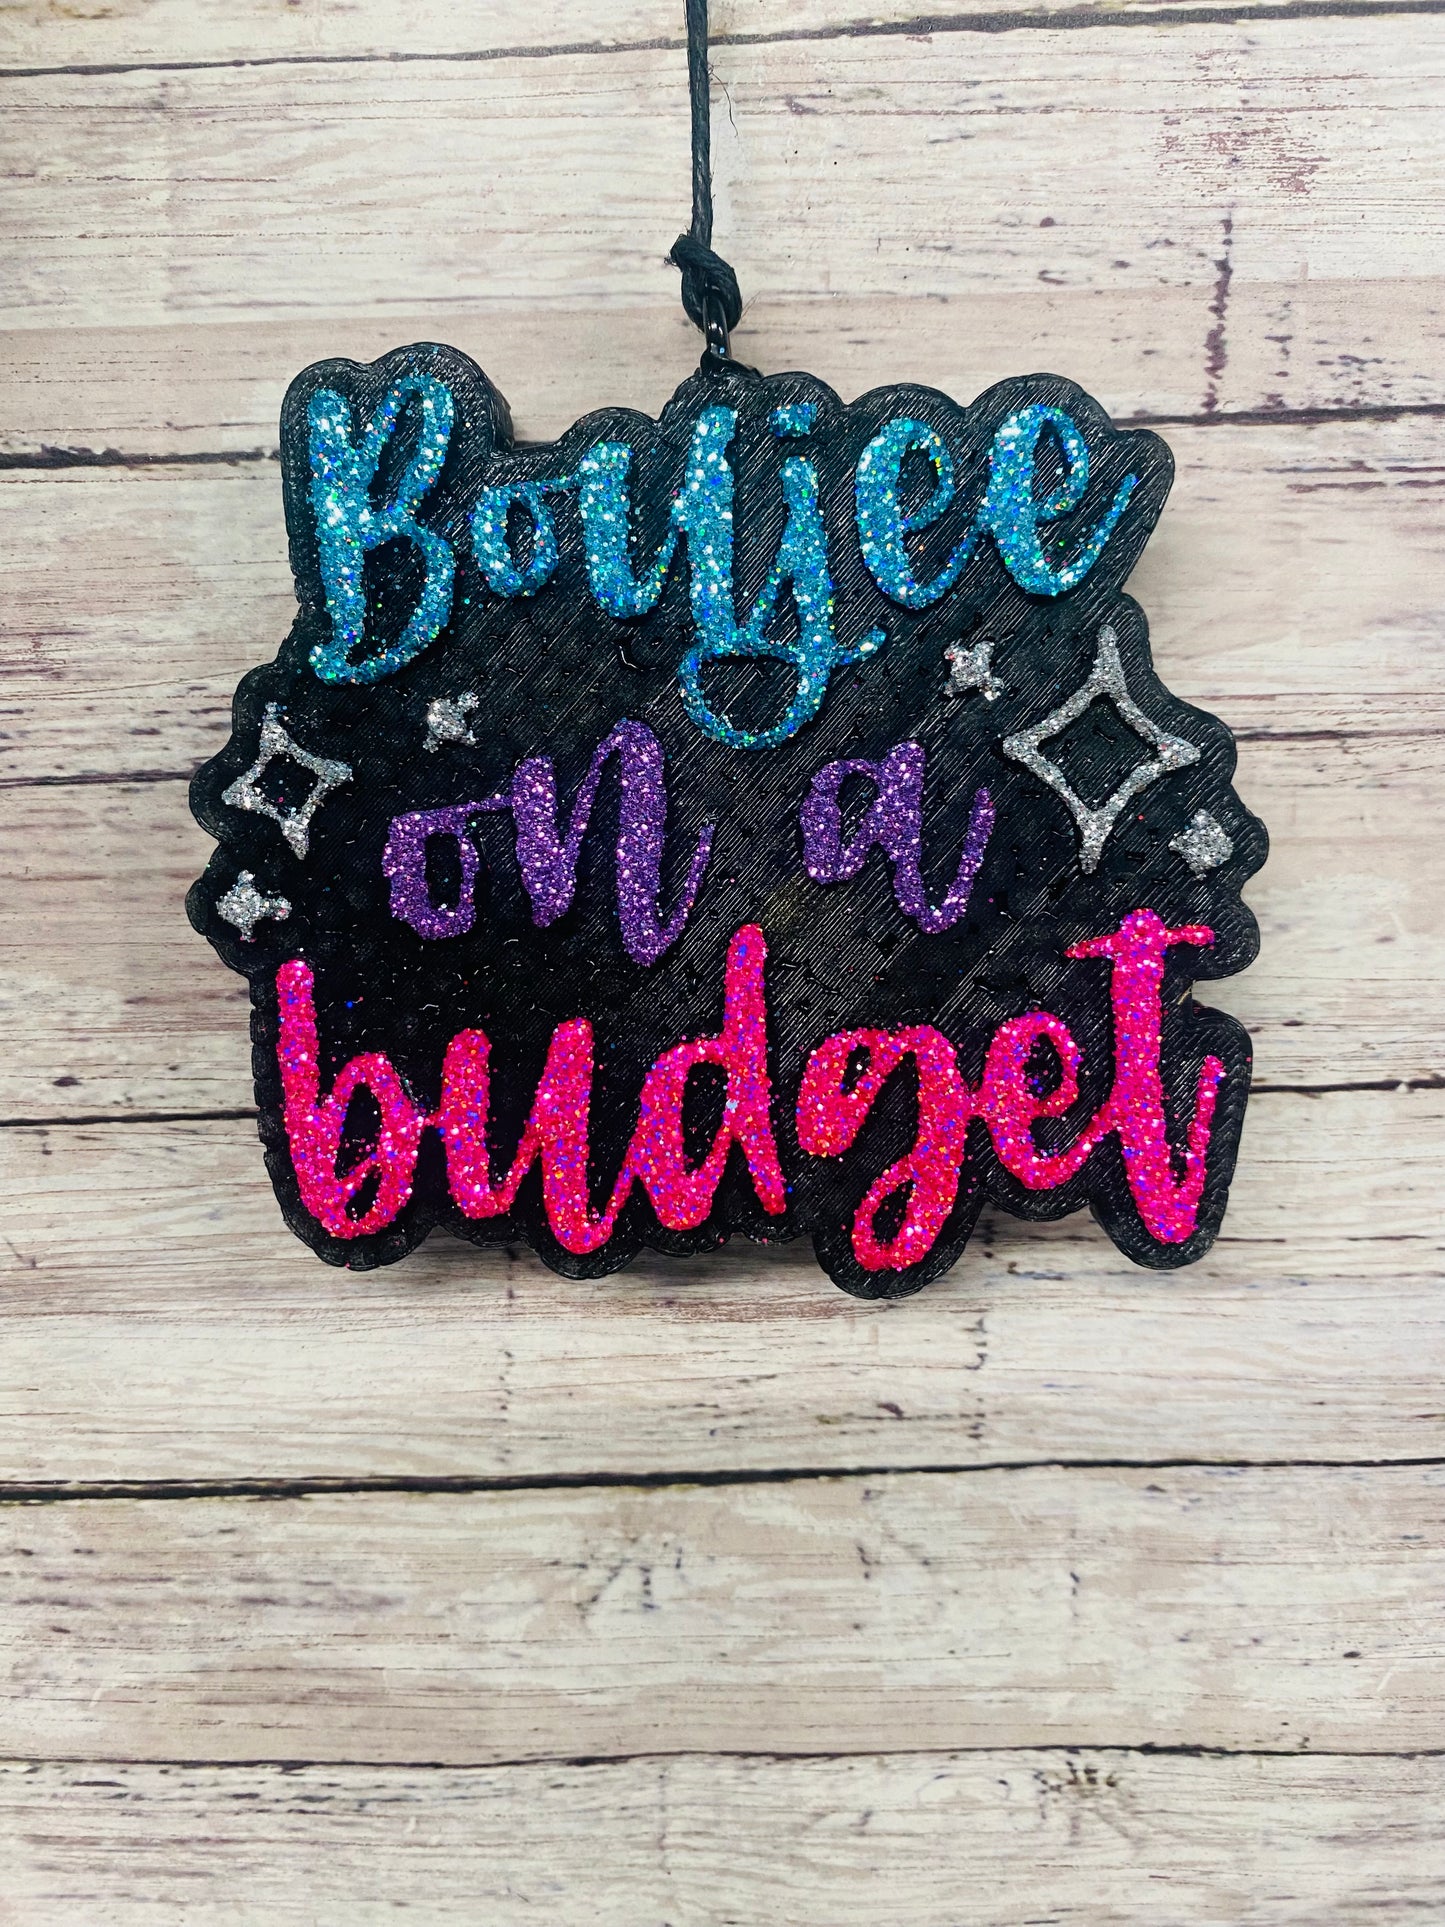 Boujee on a Budget